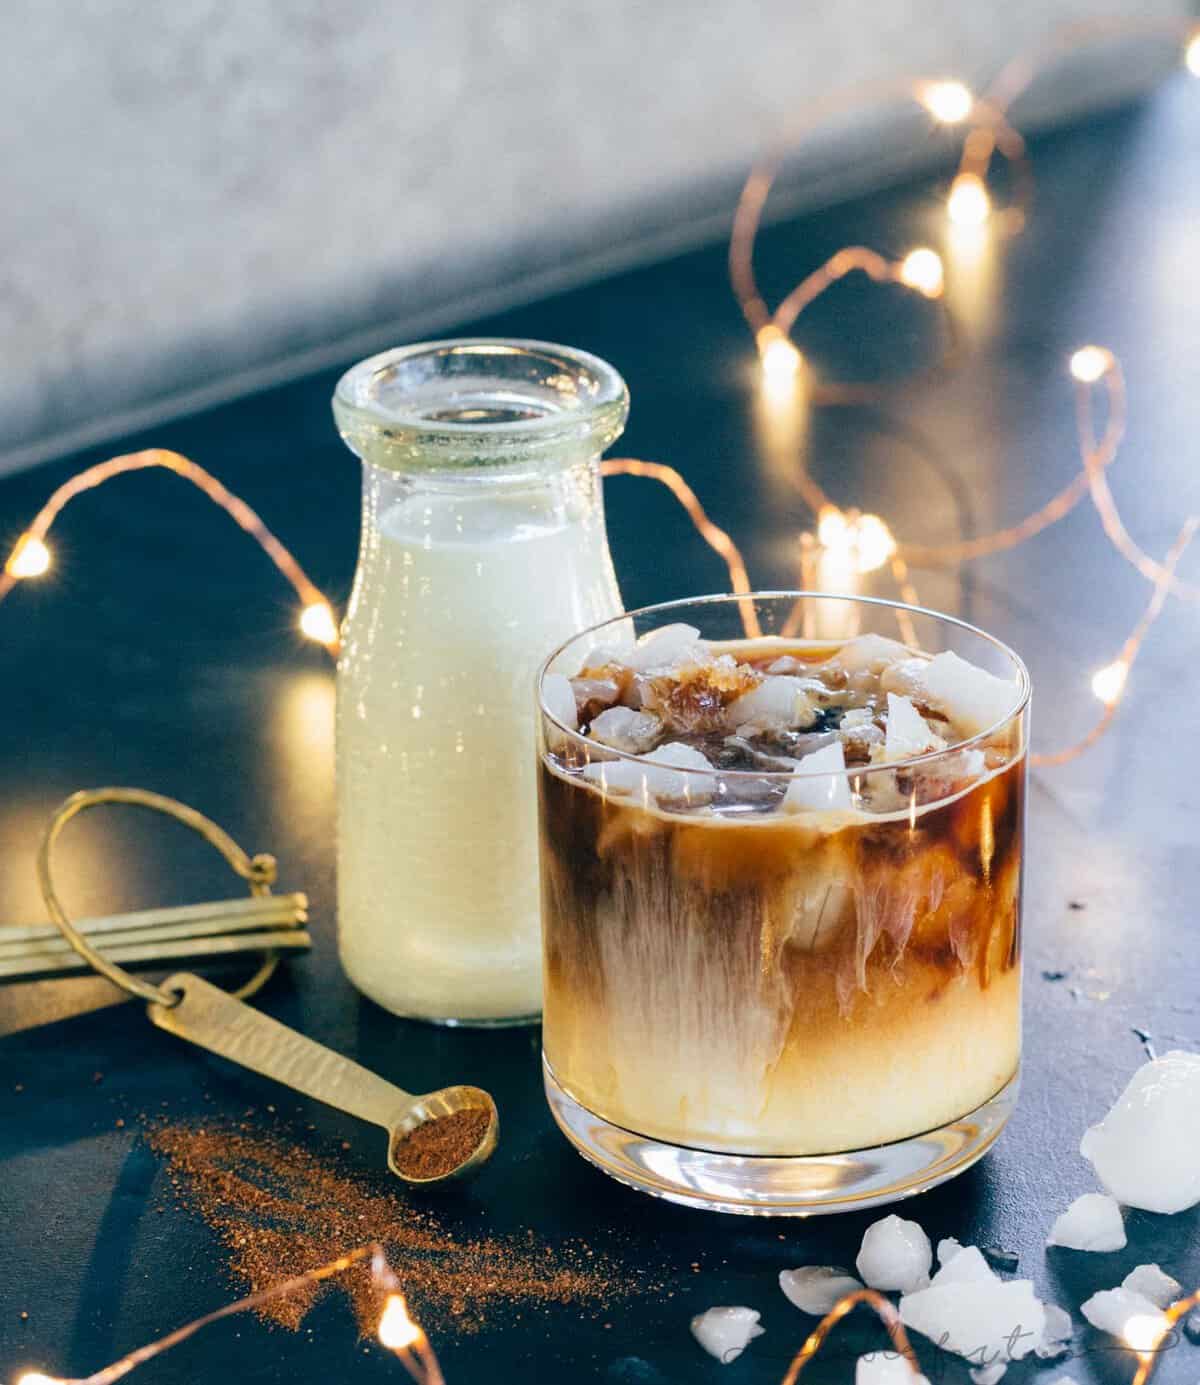 Need some pep in your step during the holidays? This iced eggnog latte is a festive and fun drink that will help with your energy levels throughout the day! Sip on this around the Christmas tree or in front of the fireplace. Anywhere you choose, it is sure to be creamy and delicious!